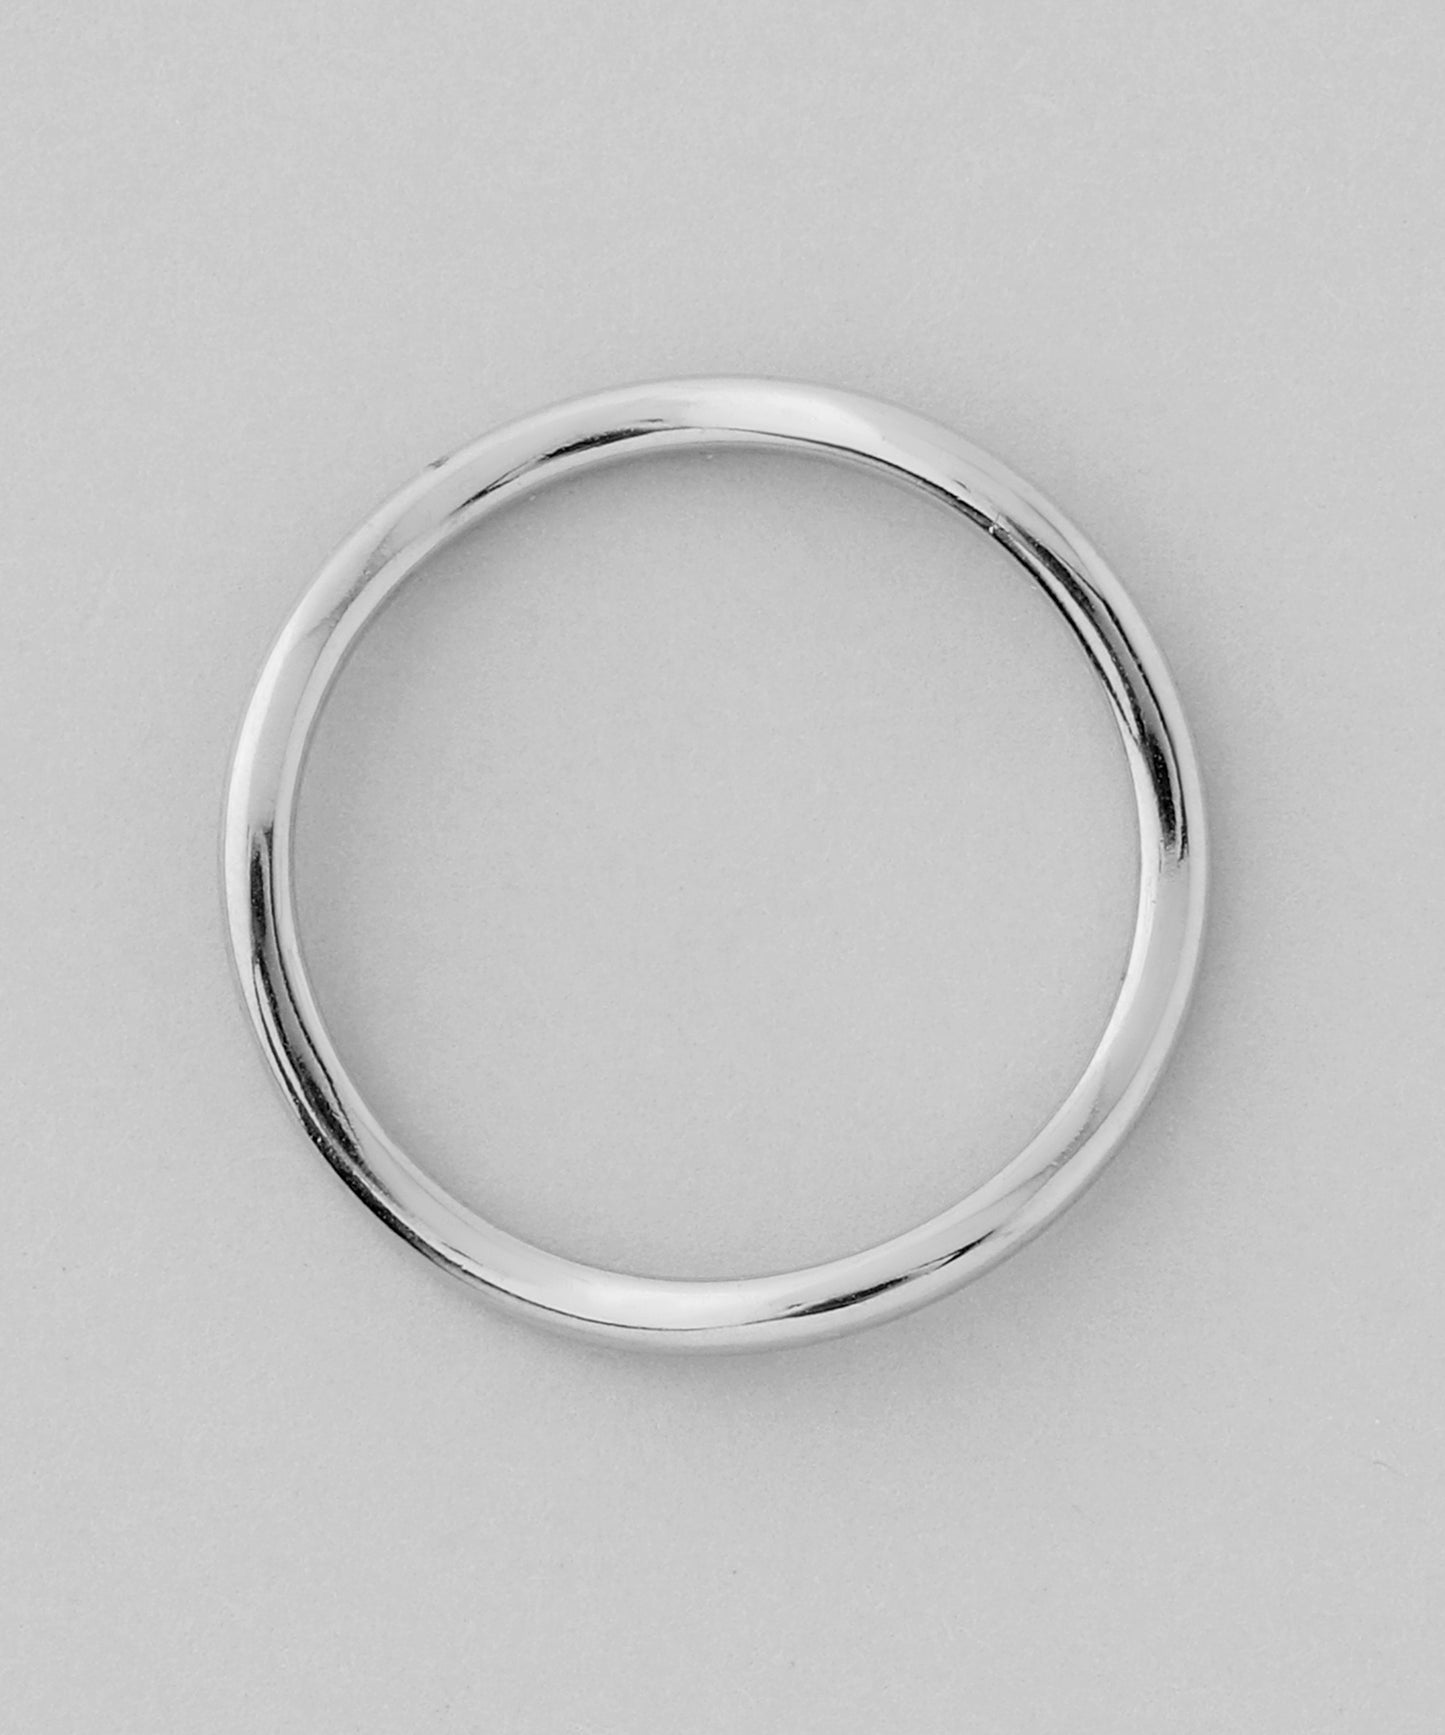 【Stainless Seel IP】Nuance Line Ring